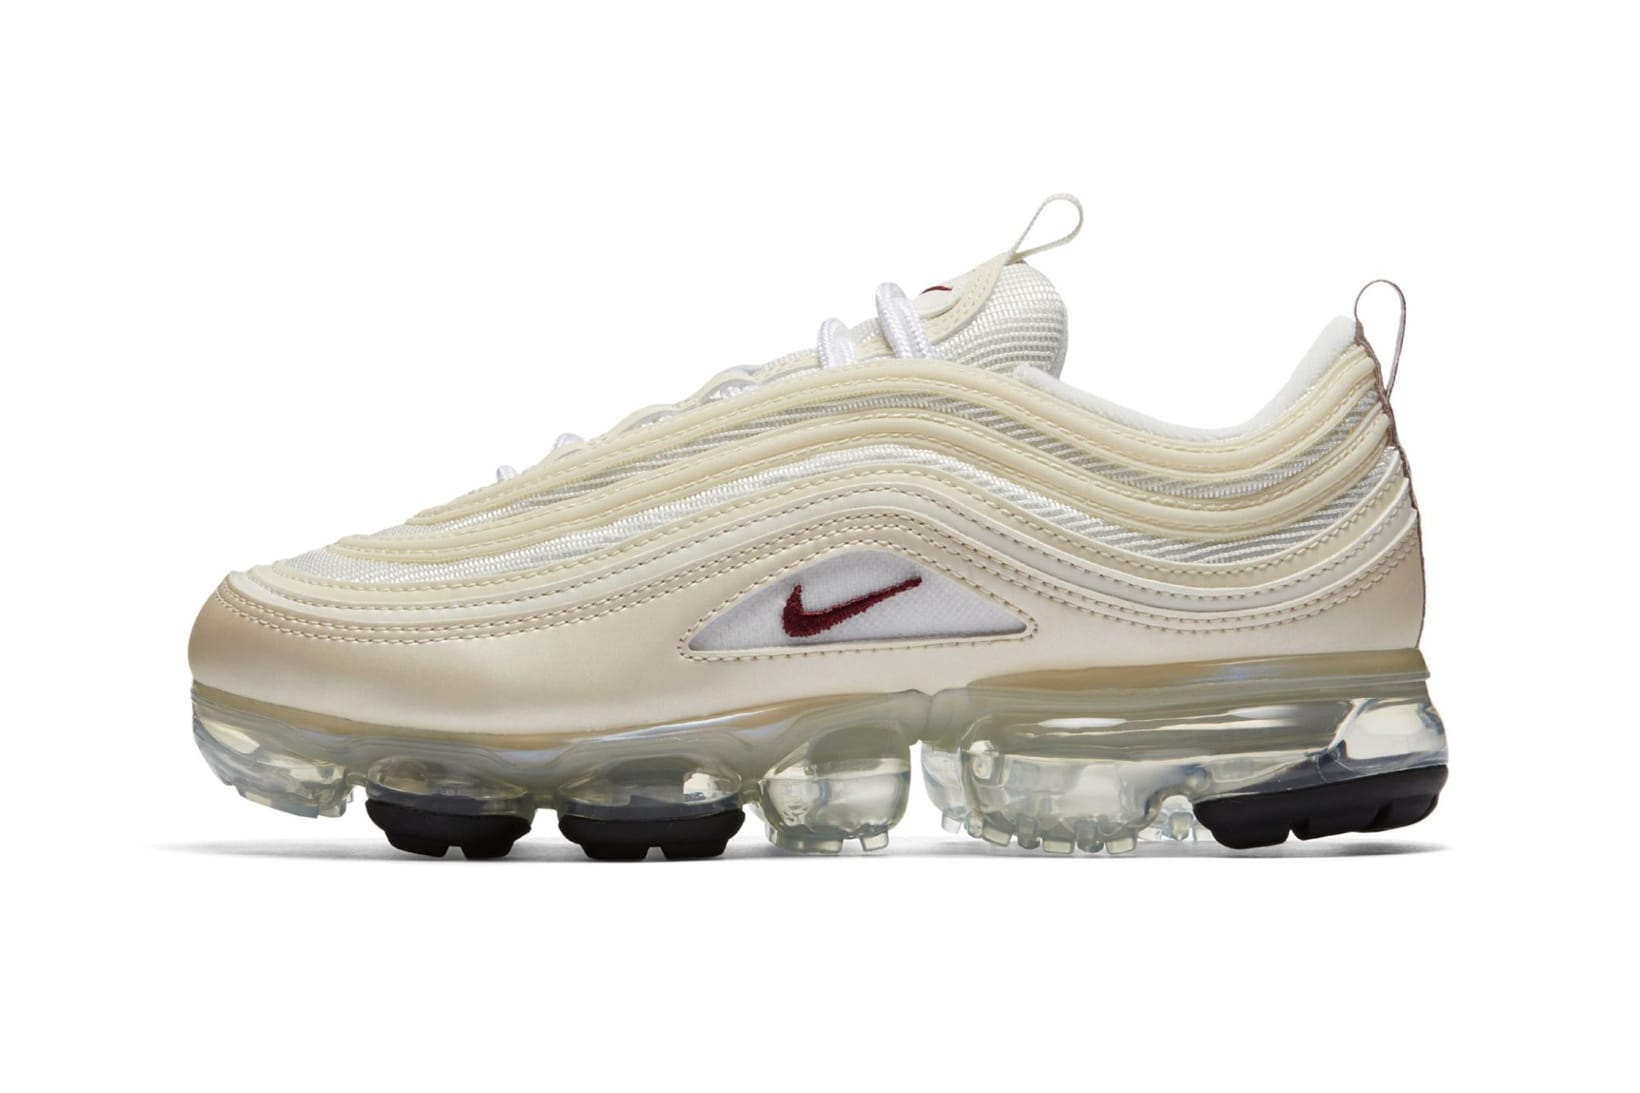 Nike Air VaporMax 97 in Beige for 2018 